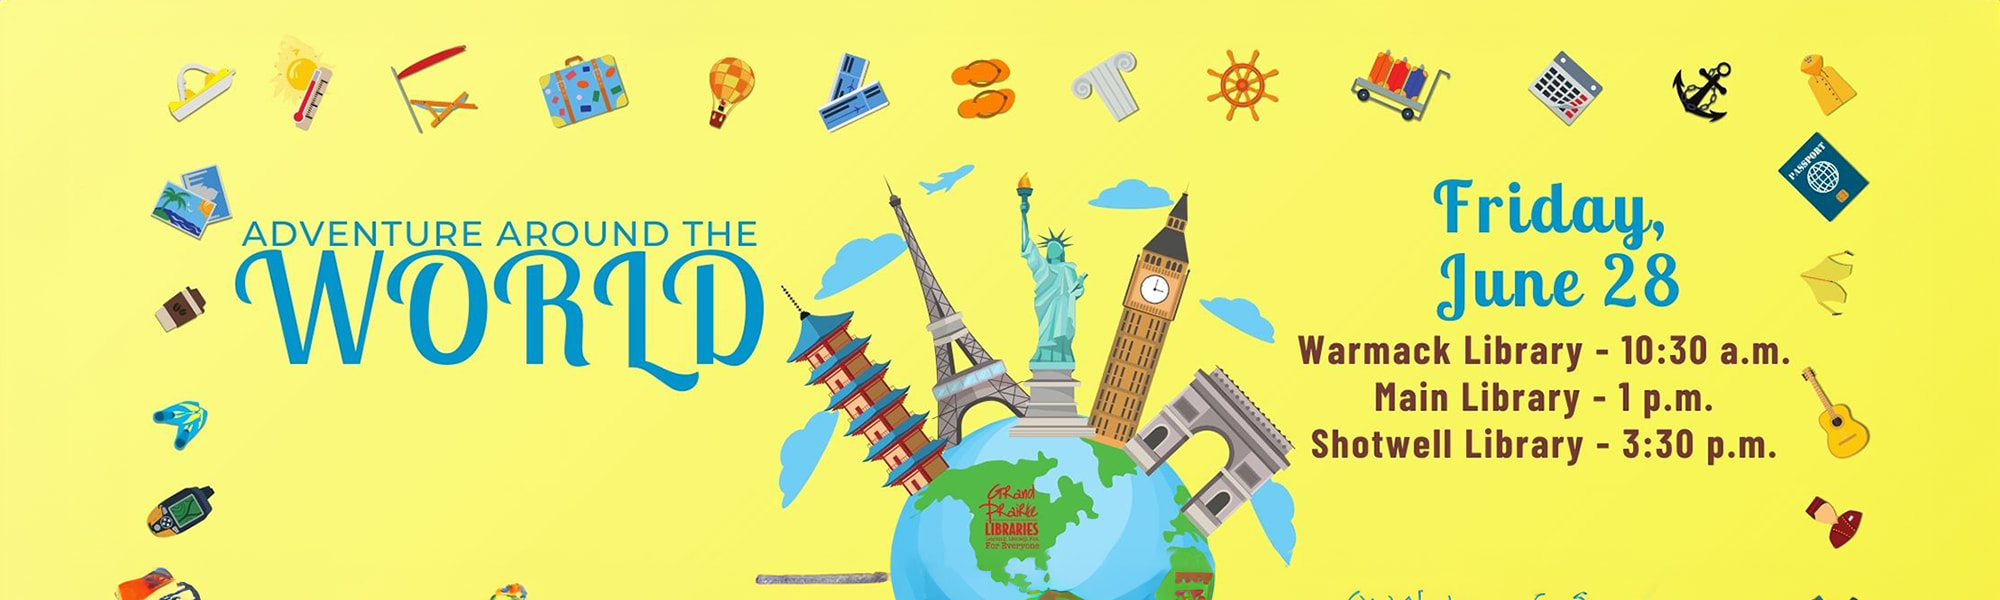 Adventure Around the World Flyer for Friday June 28. Event times and locations are: Warmack Library - 10:30am, Main Library - 1pm, Shotwell Library - 3:30pm